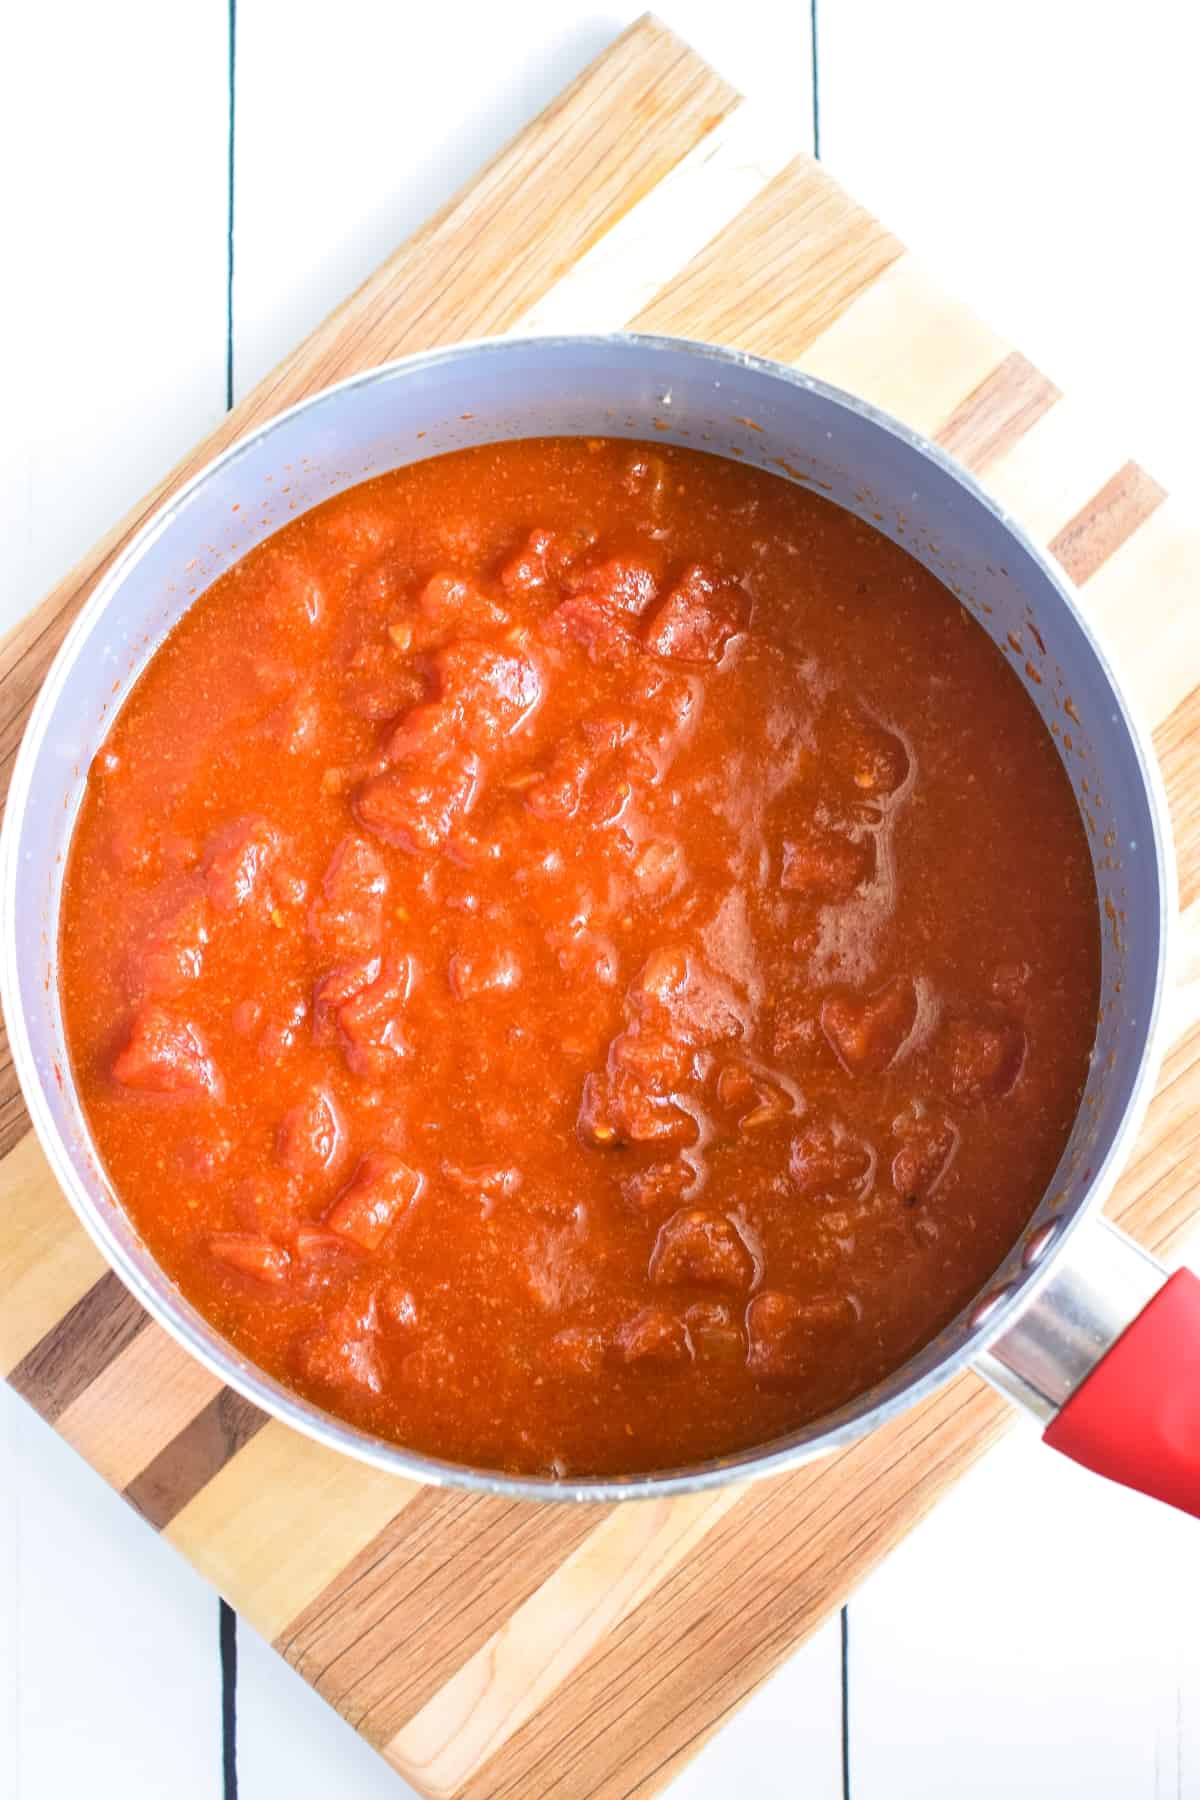 Diced tomatoes and ingredients in a pan.